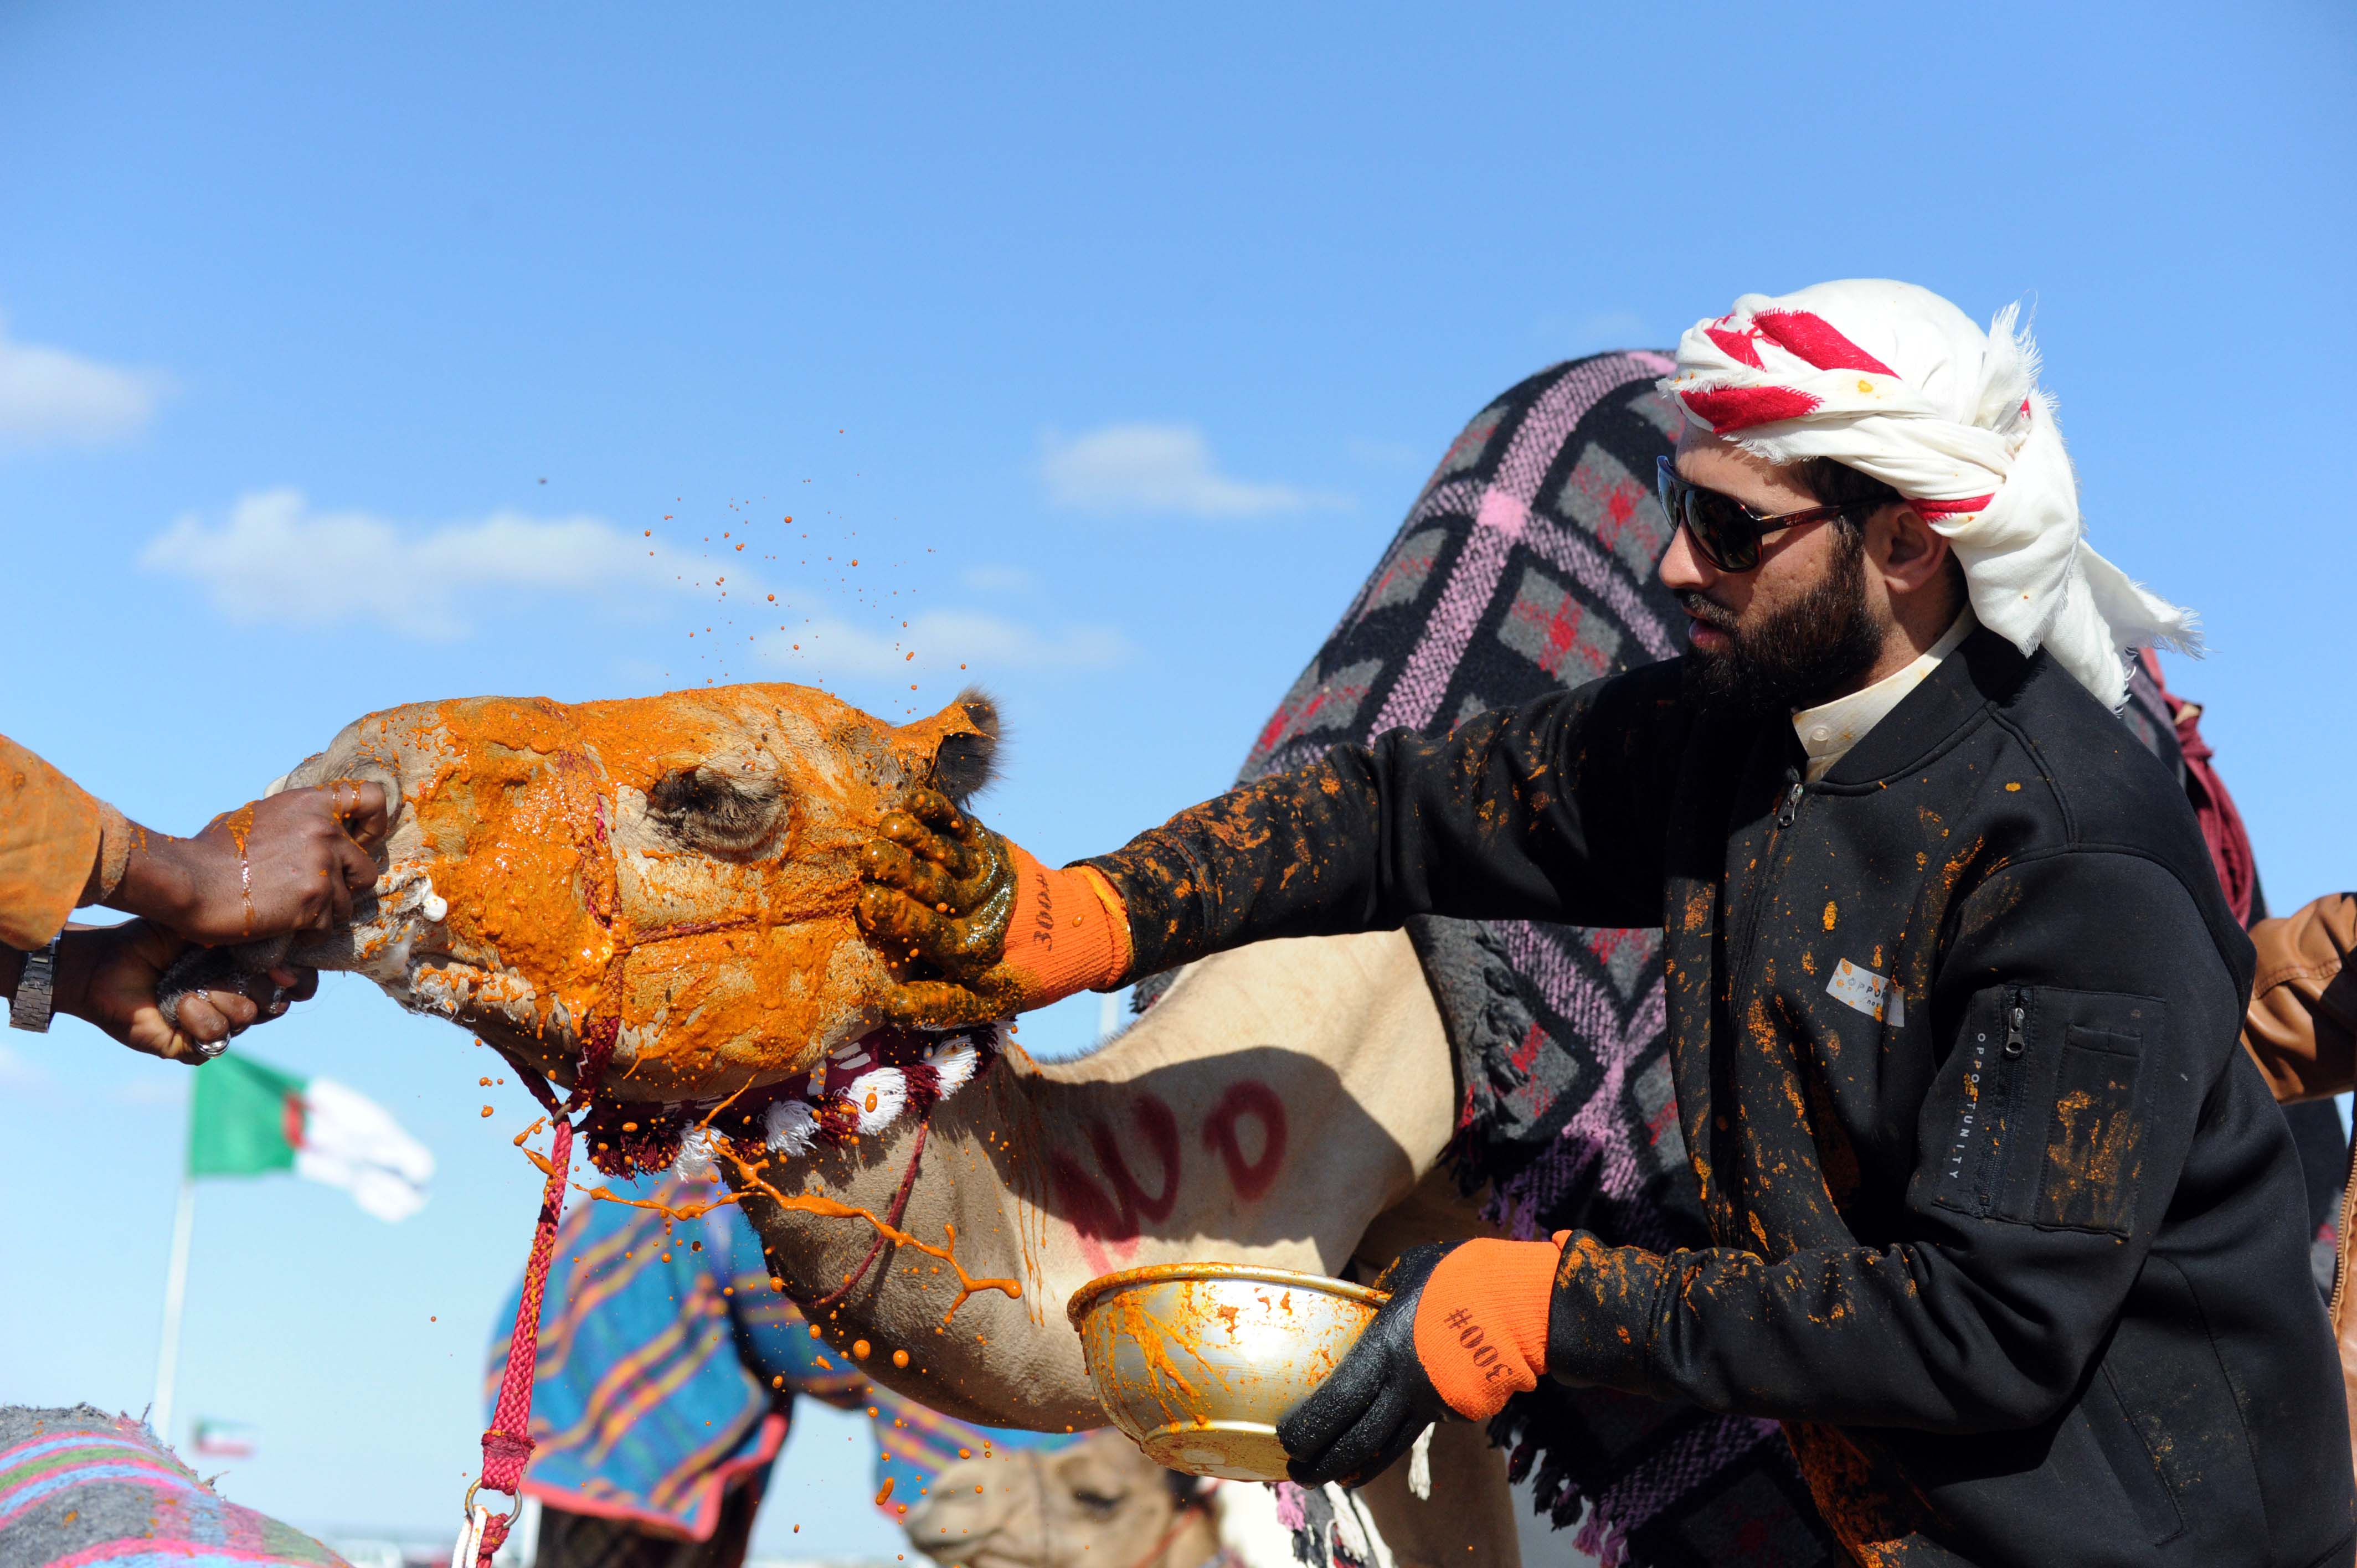 Smearing camels with saffron as part of the celebration of winning